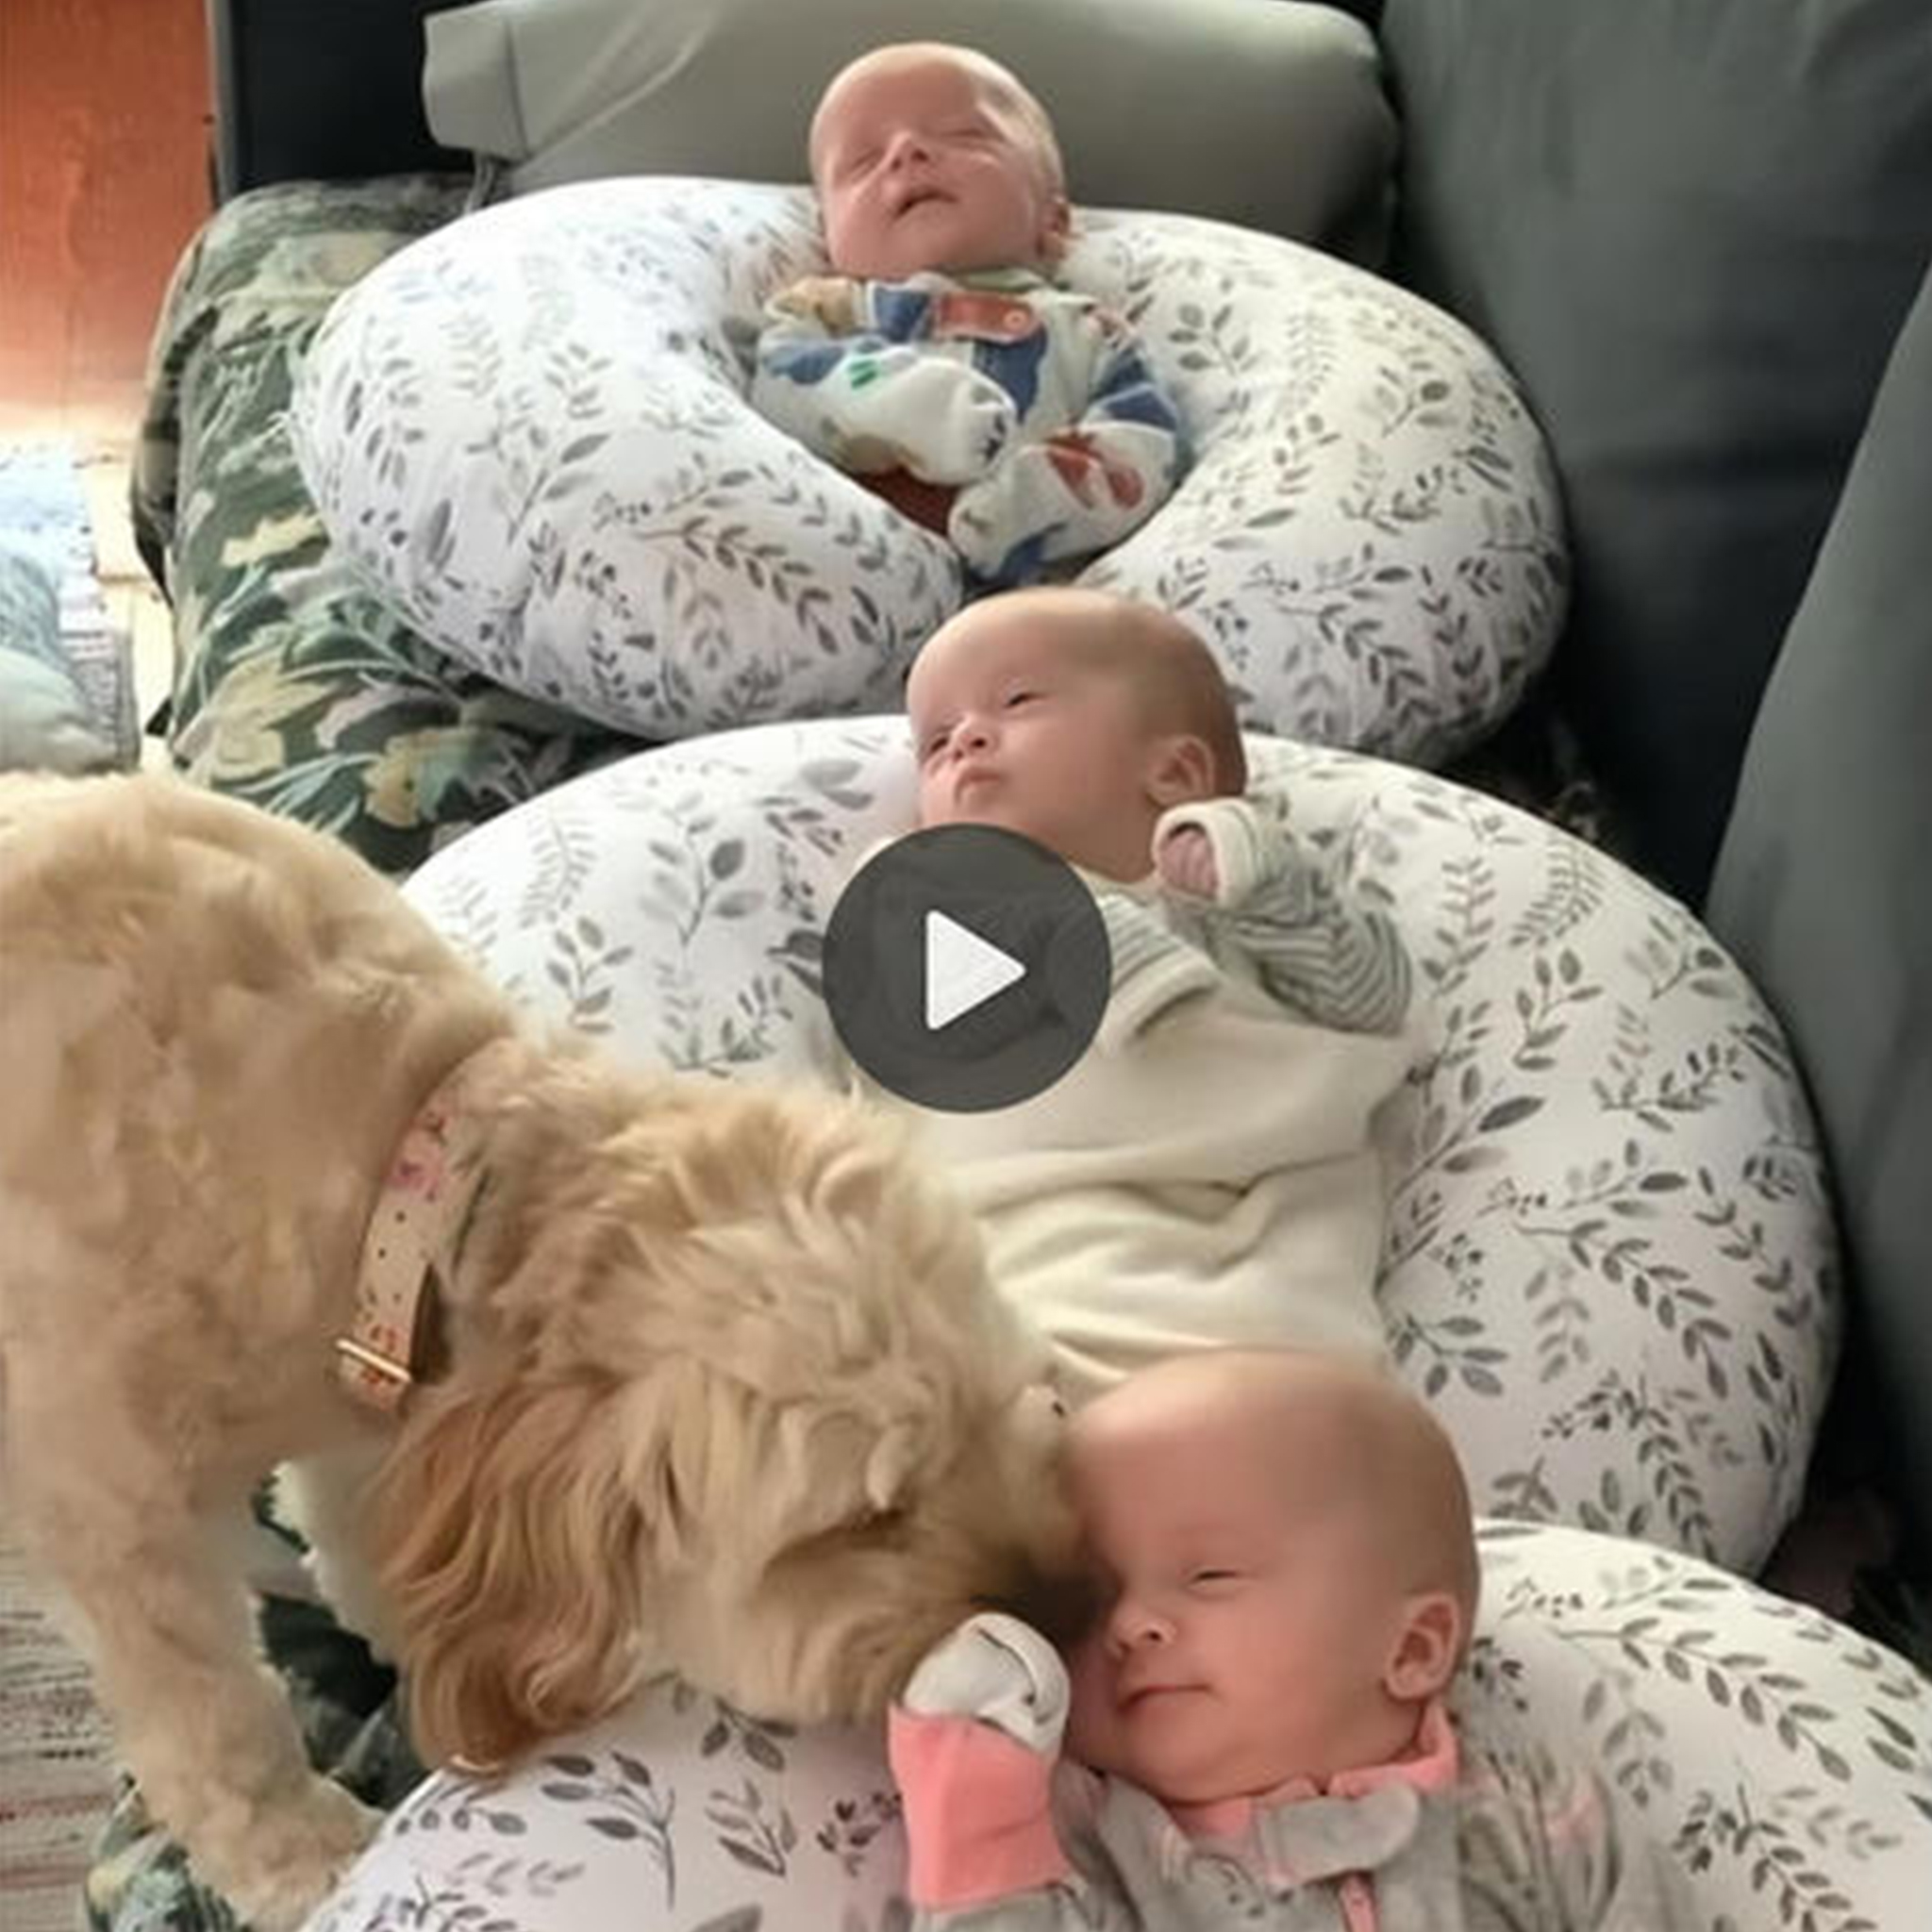 Guardian Angel in Fur: Remarkable Pet Dog Takes Care of Three Newborn Babies Alone, Leaving Neighbors in Awe and Admiration